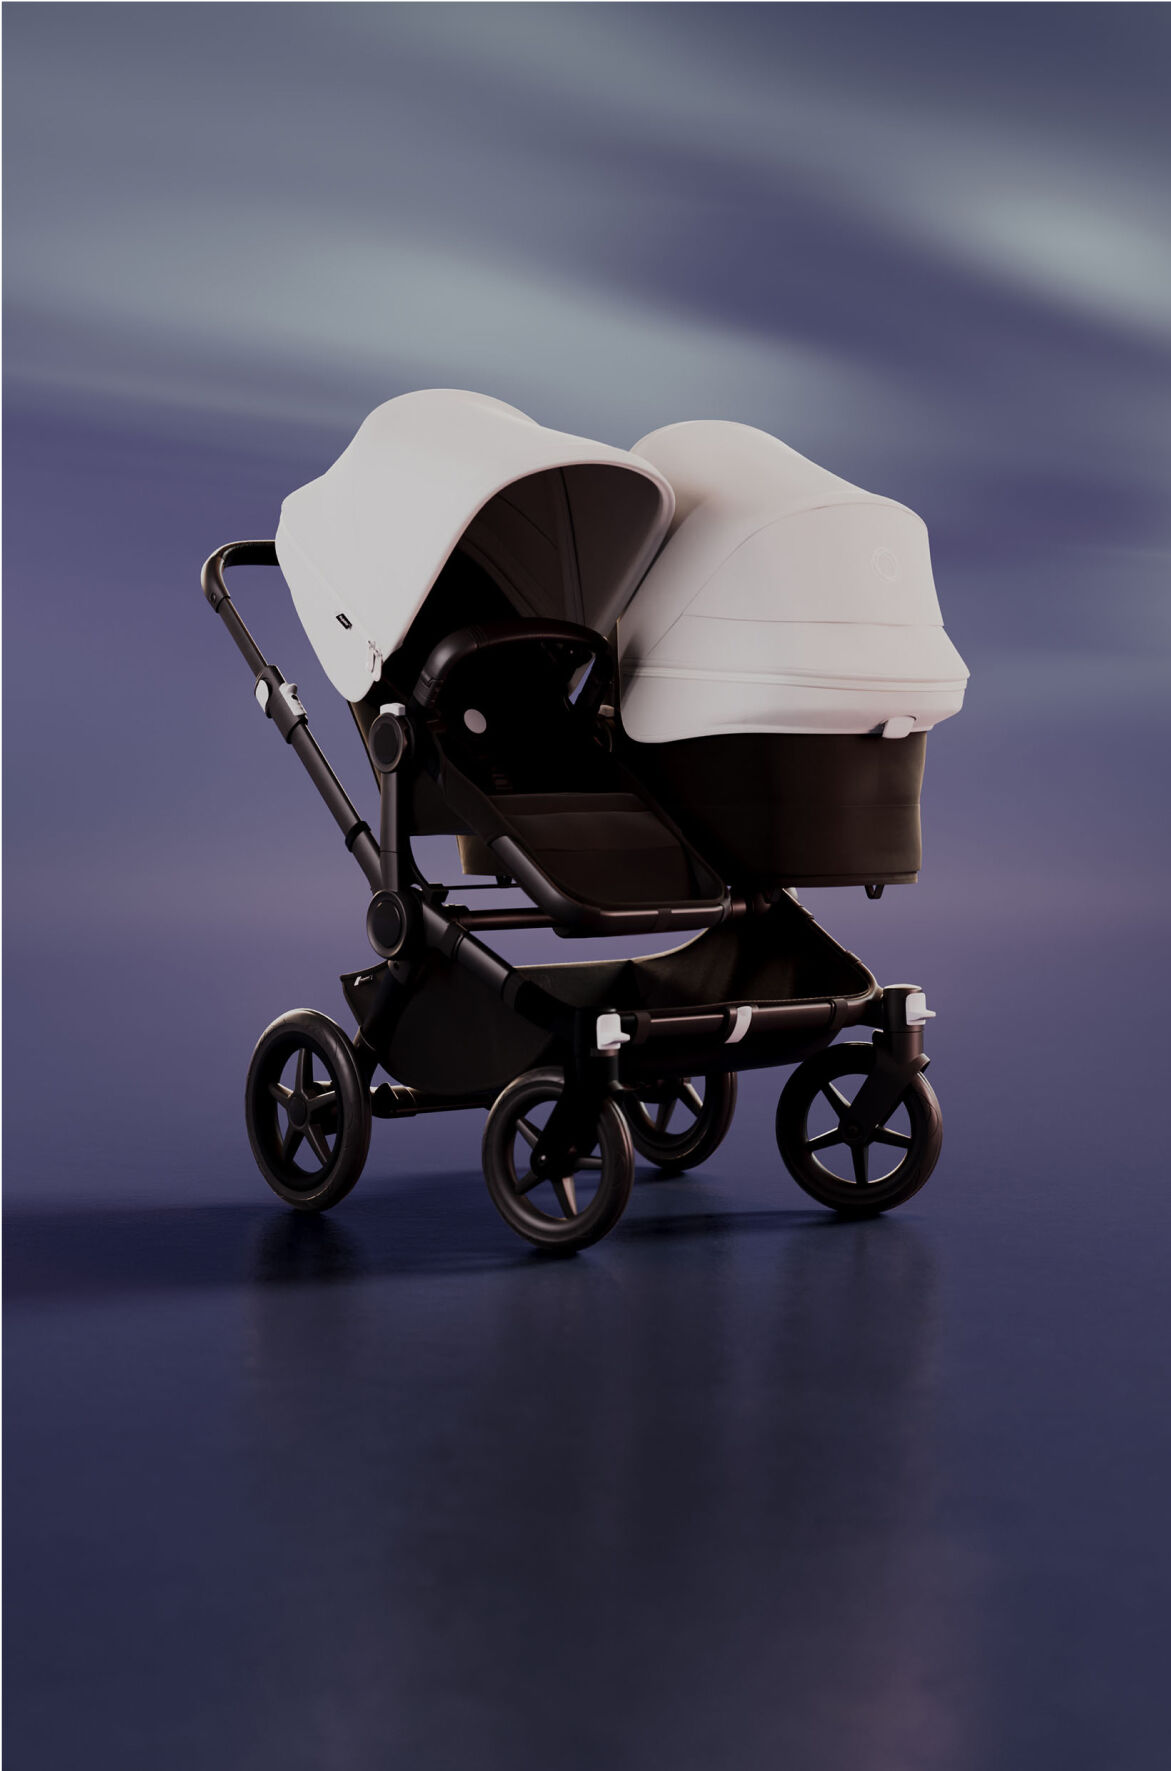 A Bugaboo Donkey 5 Duo stroller with a seat and a bassinet. The sun canopy is in Misty White. The background is blue with streaks of white.